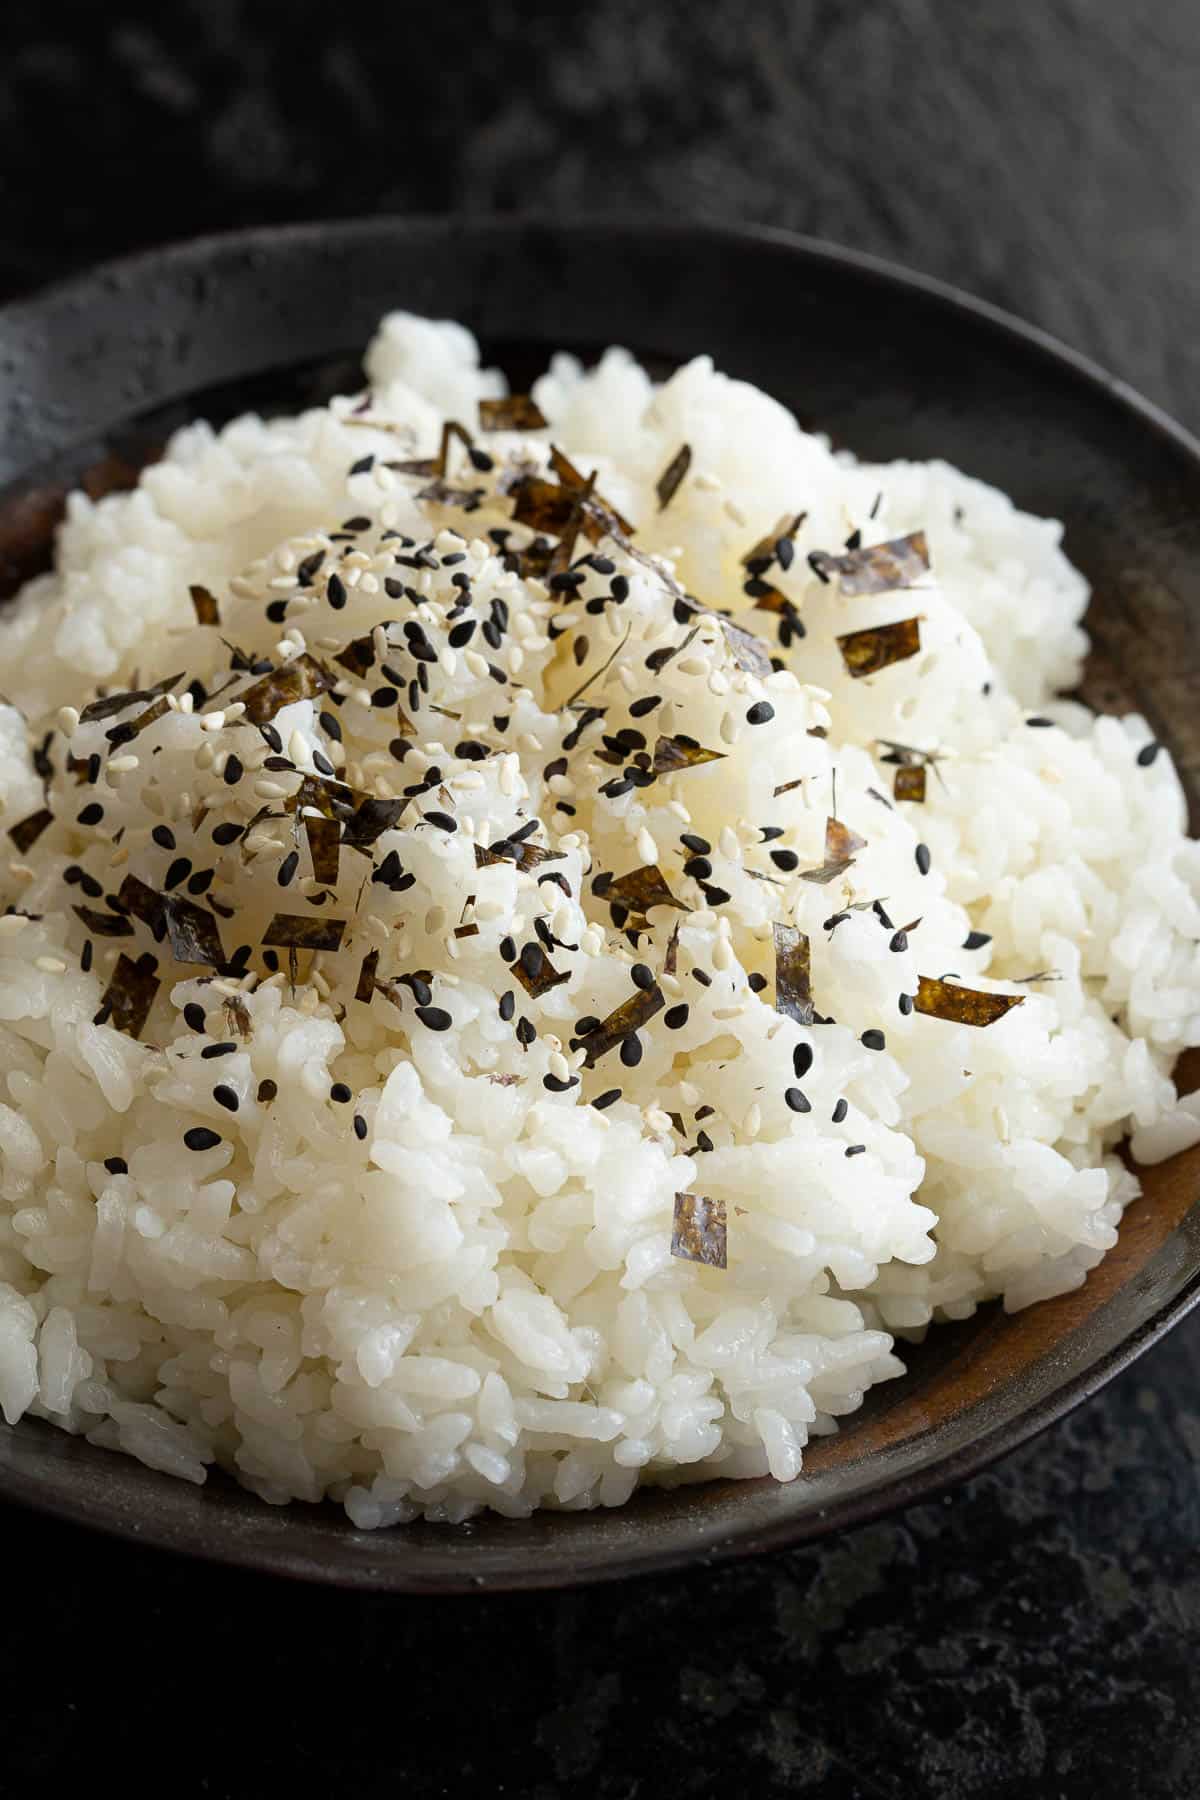 A bowl of cooked rice sprinkled with furikake rice seasoning.